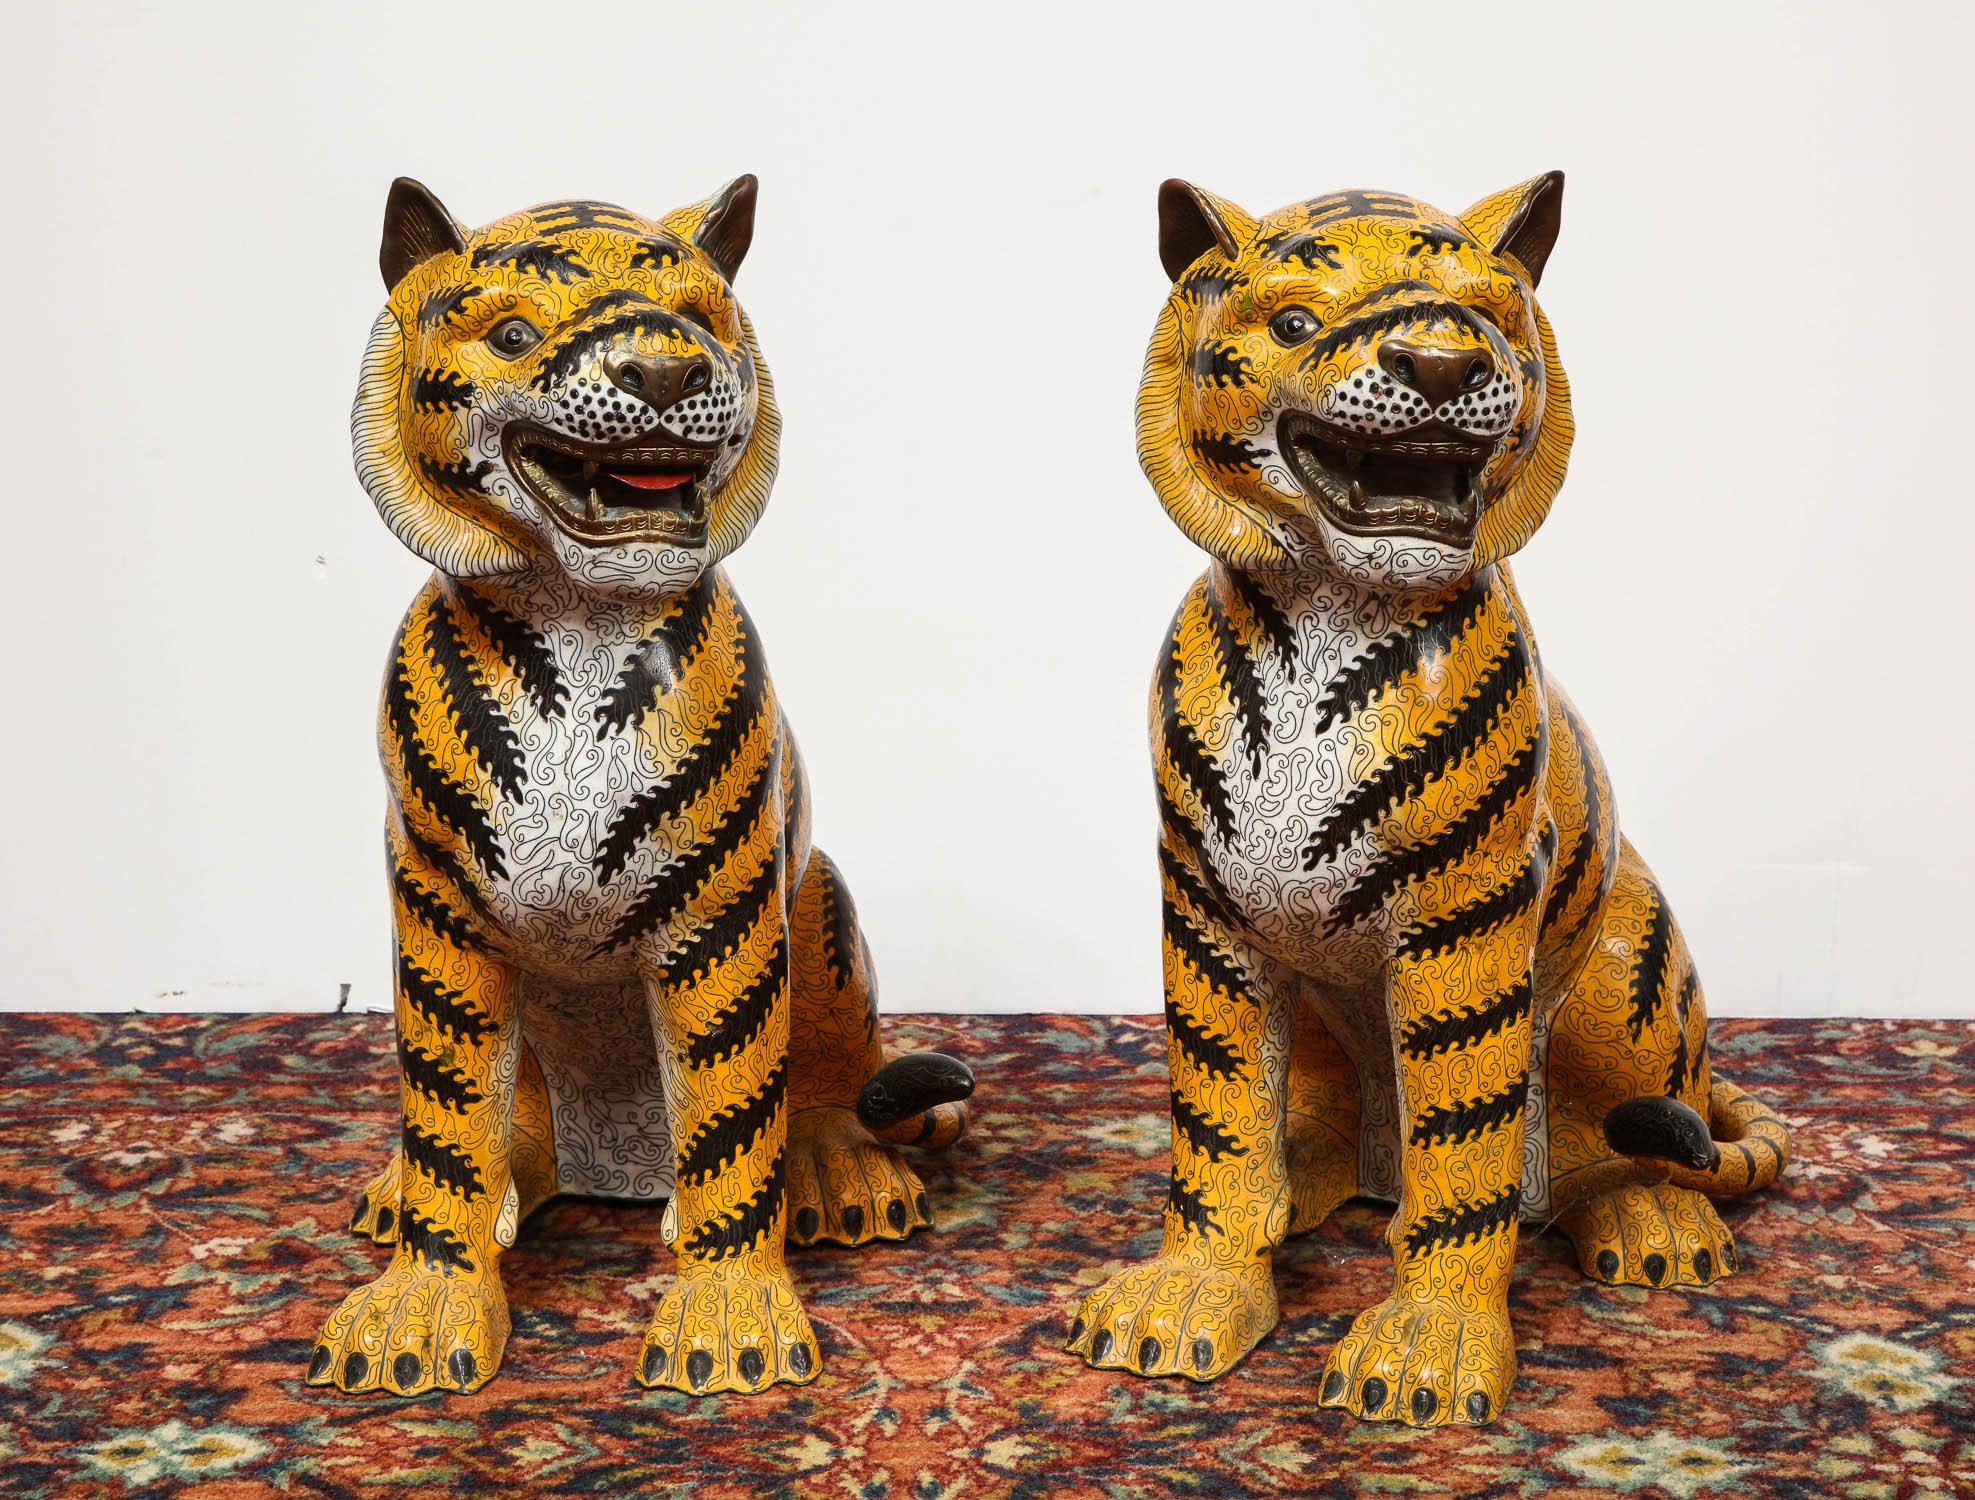 A large pair of Chinese Asian cloisonne enamel tigers,

circa 1920.

Very decorative. Very fine quality. See photos.

Measures: 23